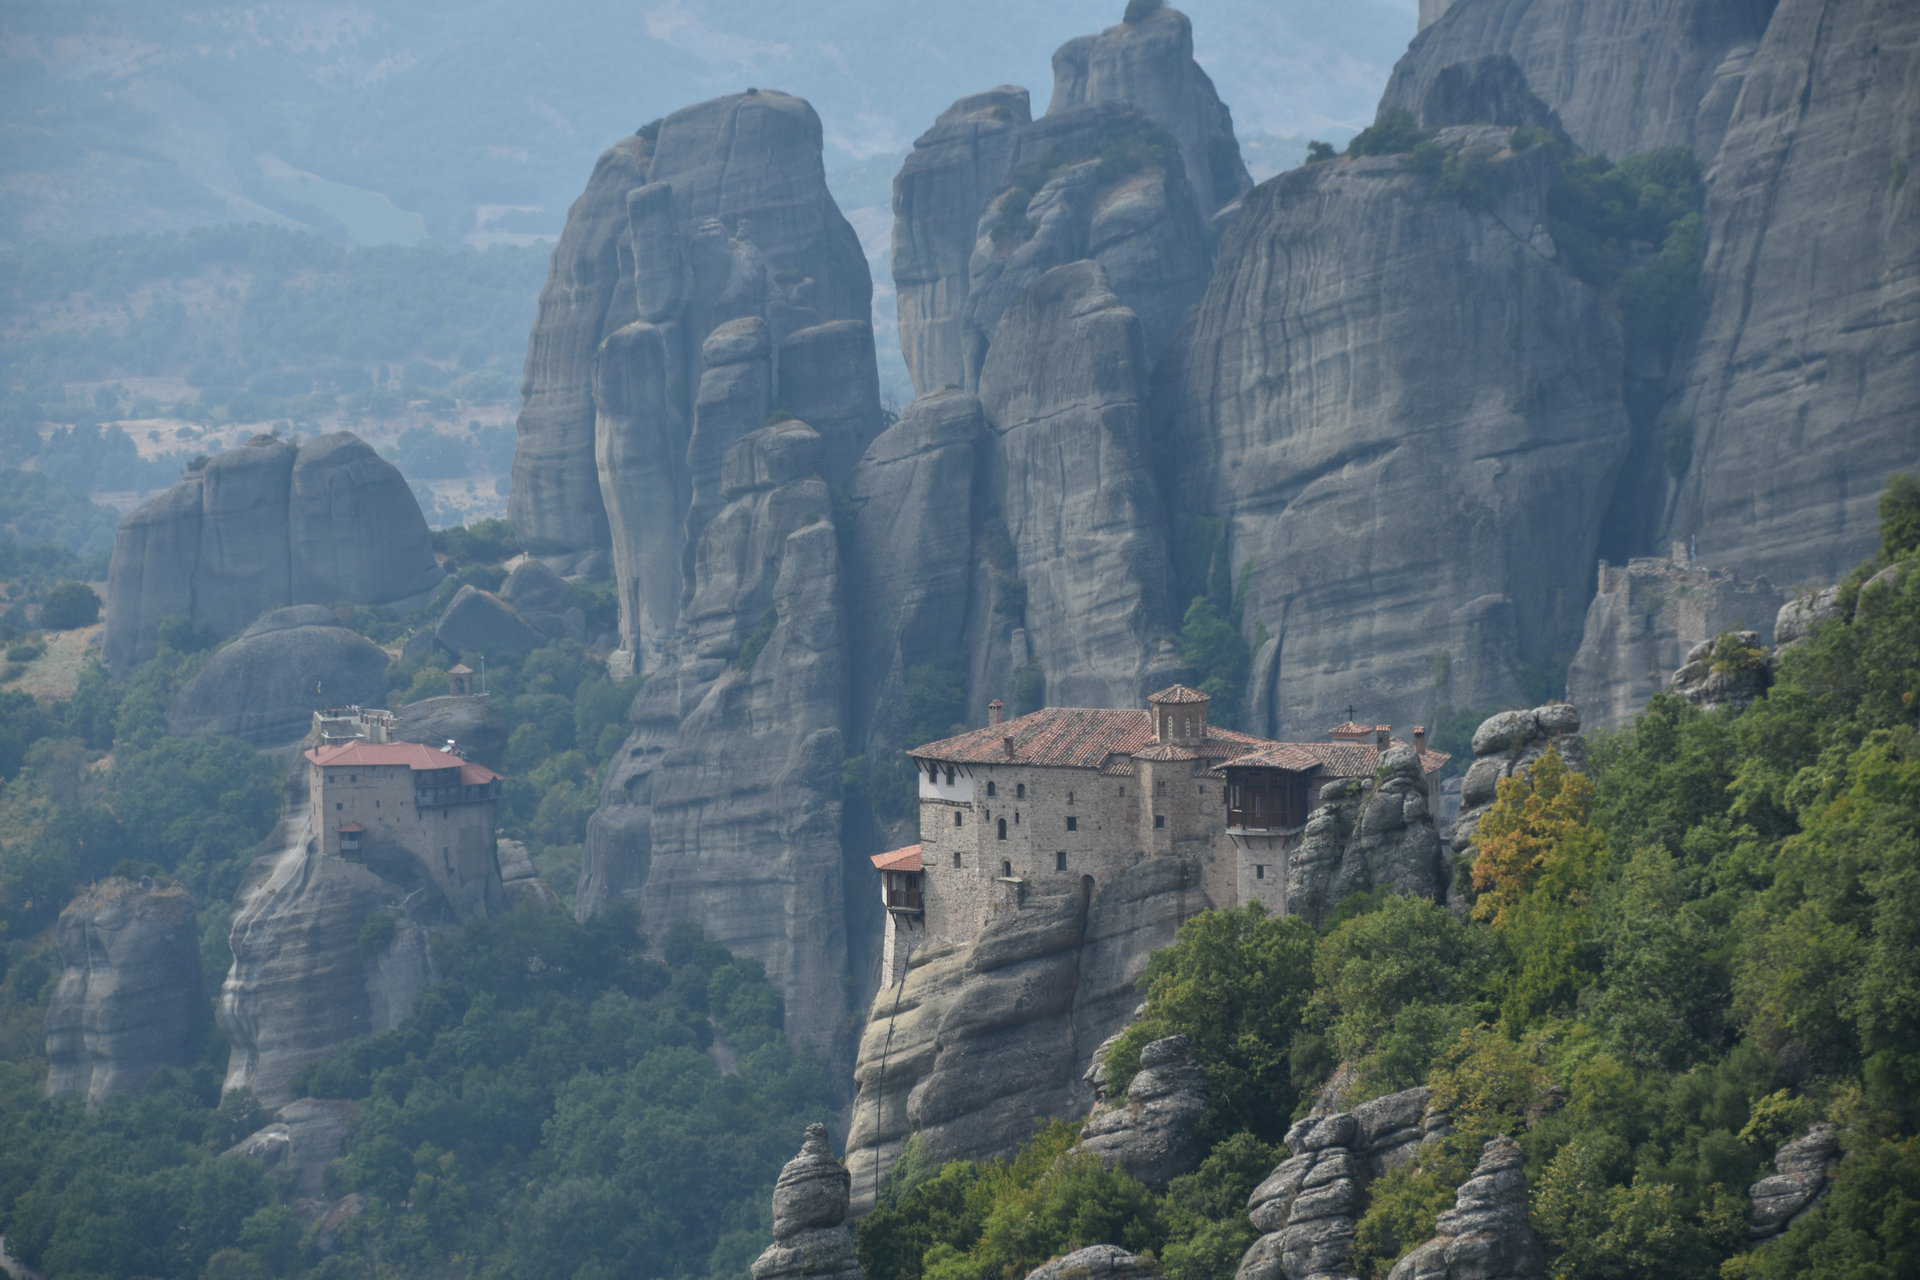 one of the monasteries in Meteora, Greece perched on the rock